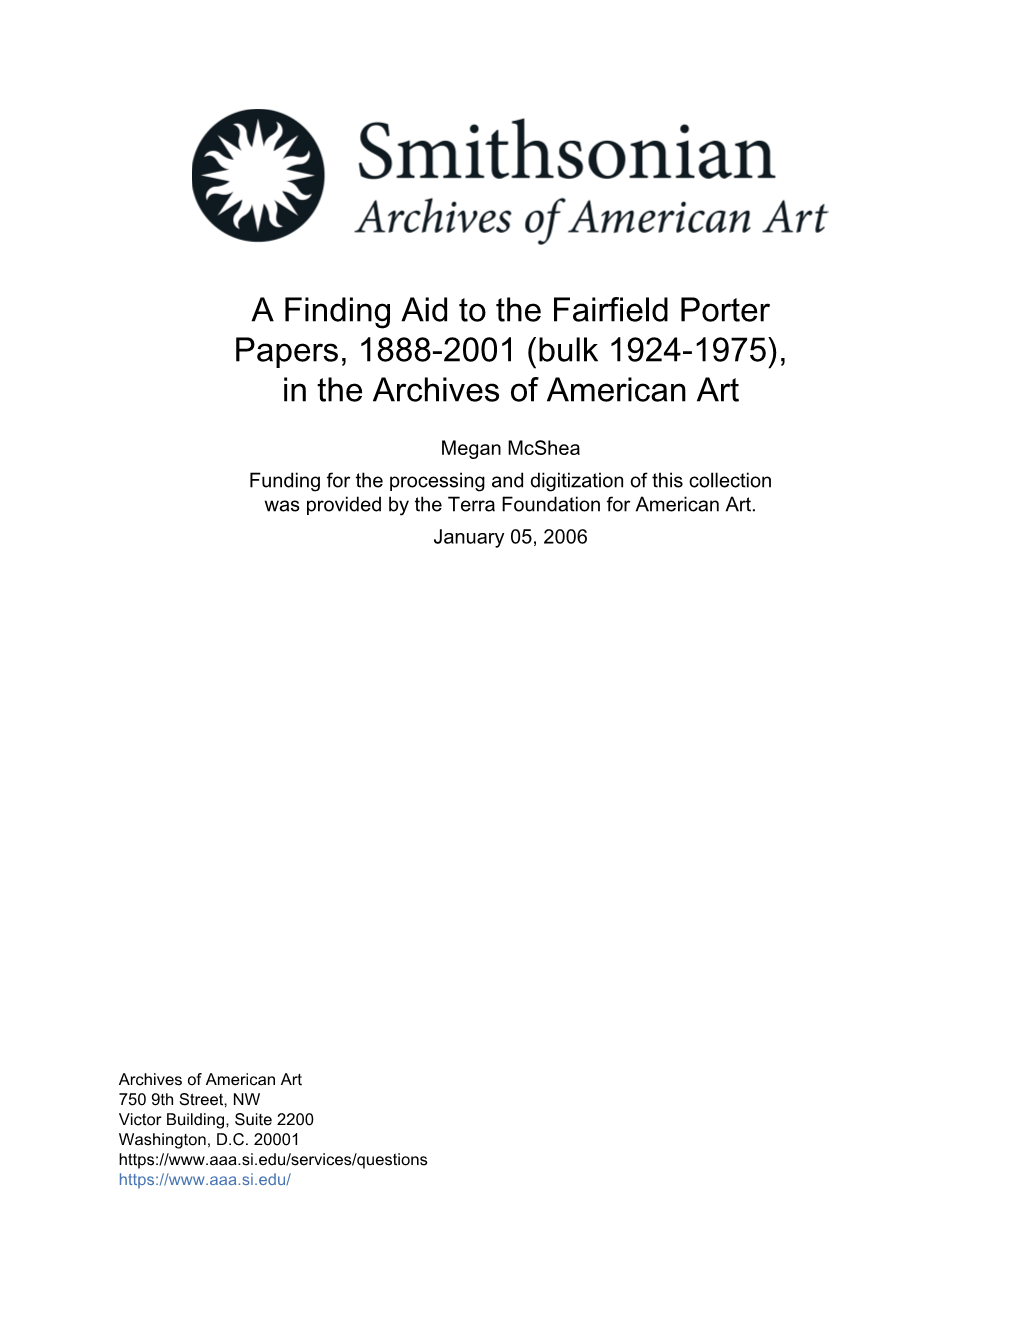 A Finding Aid to the Fairfield Porter Papers, 1888-2001 (Bulk 1924-1975), in the Archives of American Art